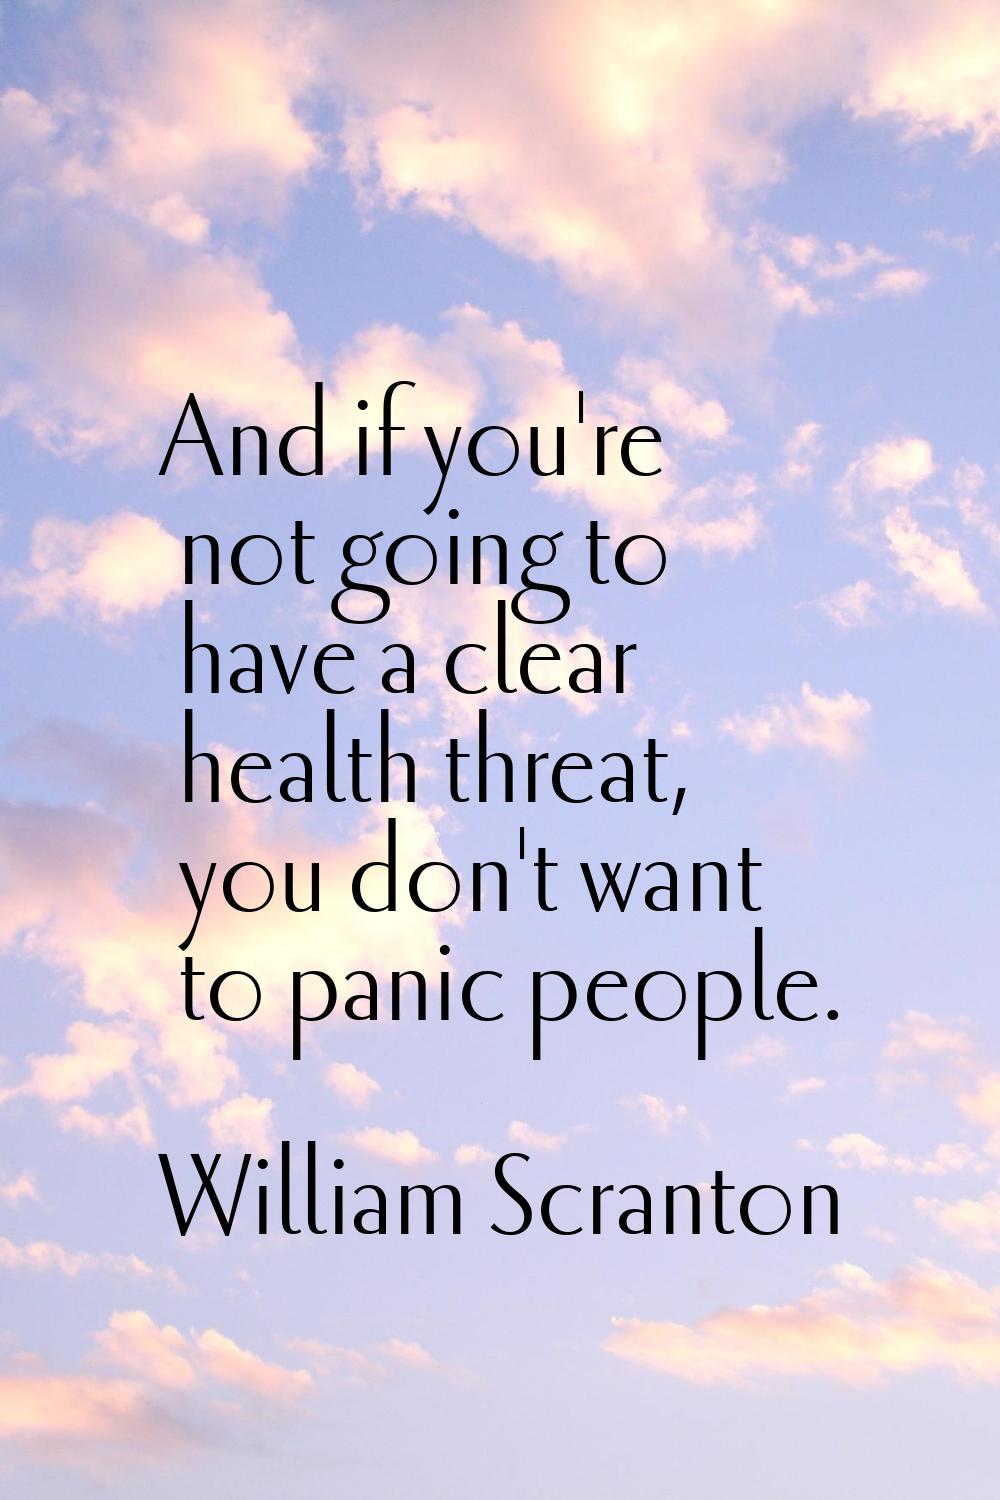 And if you're not going to have a clear health threat, you don't want to panic people.